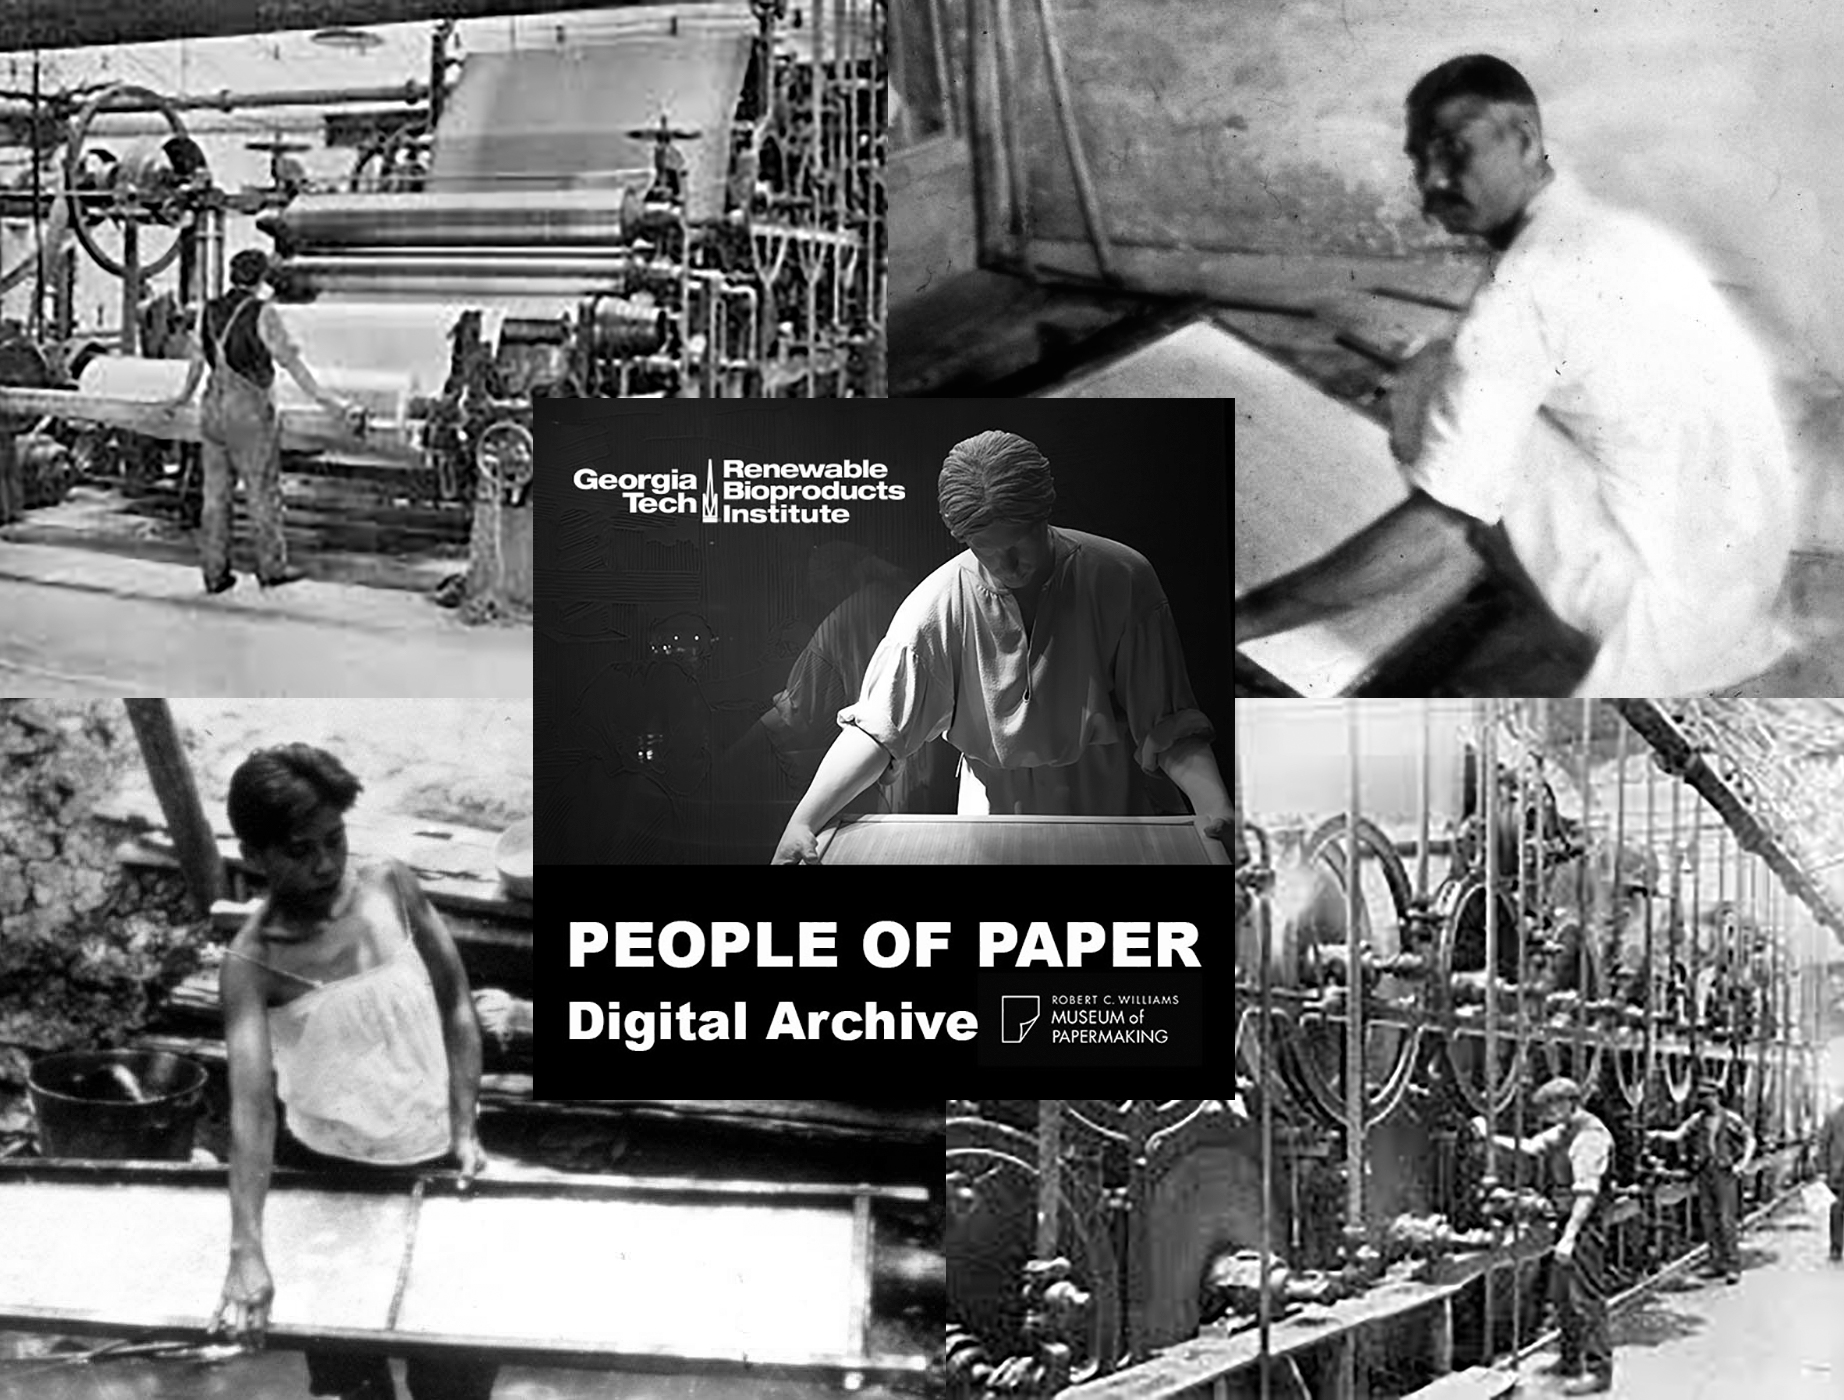 People of Paper Logo is a black and white collage of papermakers. At the center is an image of a life-size white plaster model of an 18th century European papermaker with the words People of Paper Digital Archive underneath the image. This central image overlaps four images of papermakers. In the top right corner, there is a picture of an Indian papermaker squatting at a recessed vat. Just below the Indian papermaker is an image of an early 20th century industrial papermill. Moving clockwise, in the bottom left corner a Siamese papermaker holding a long skinny paper mould. The final picture in the top left corner is another image of an industrial paper machine from the early 1900's.